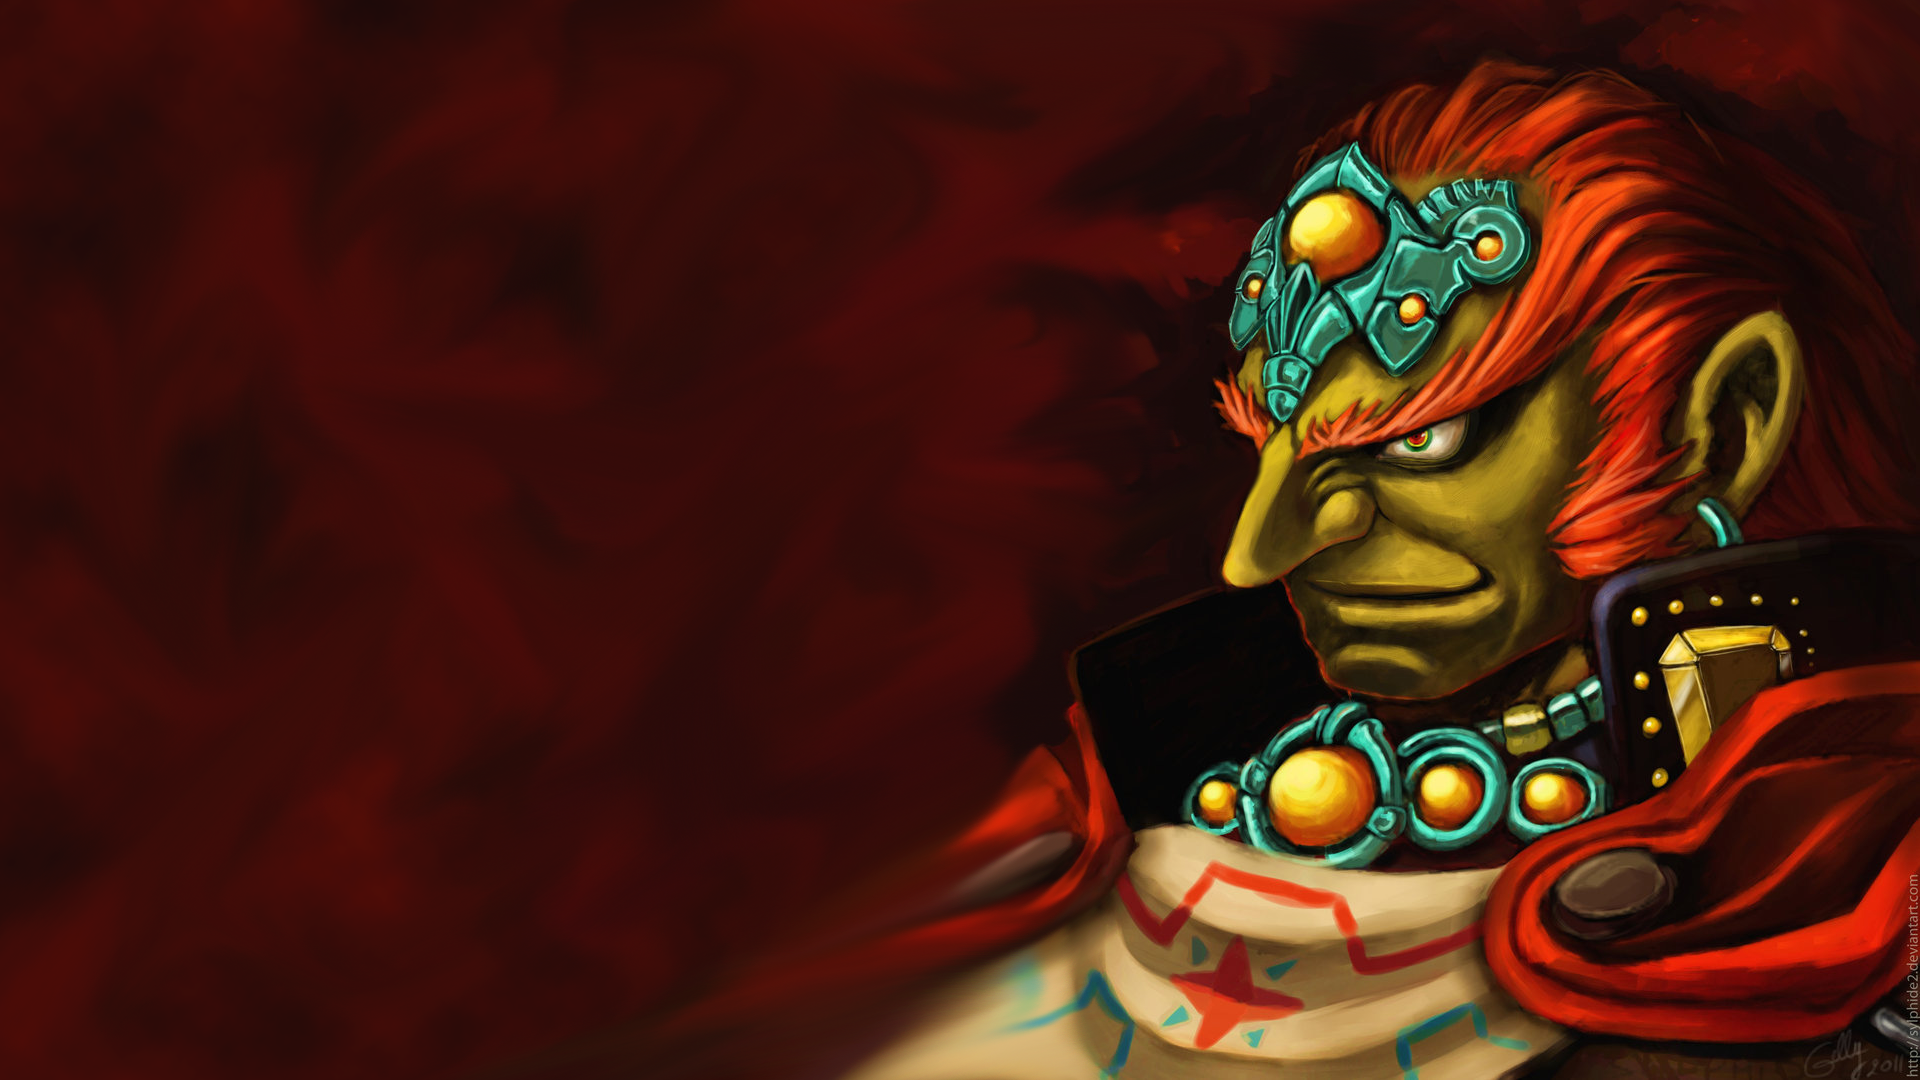 Whipped up a quick Ganondorf wallpaper